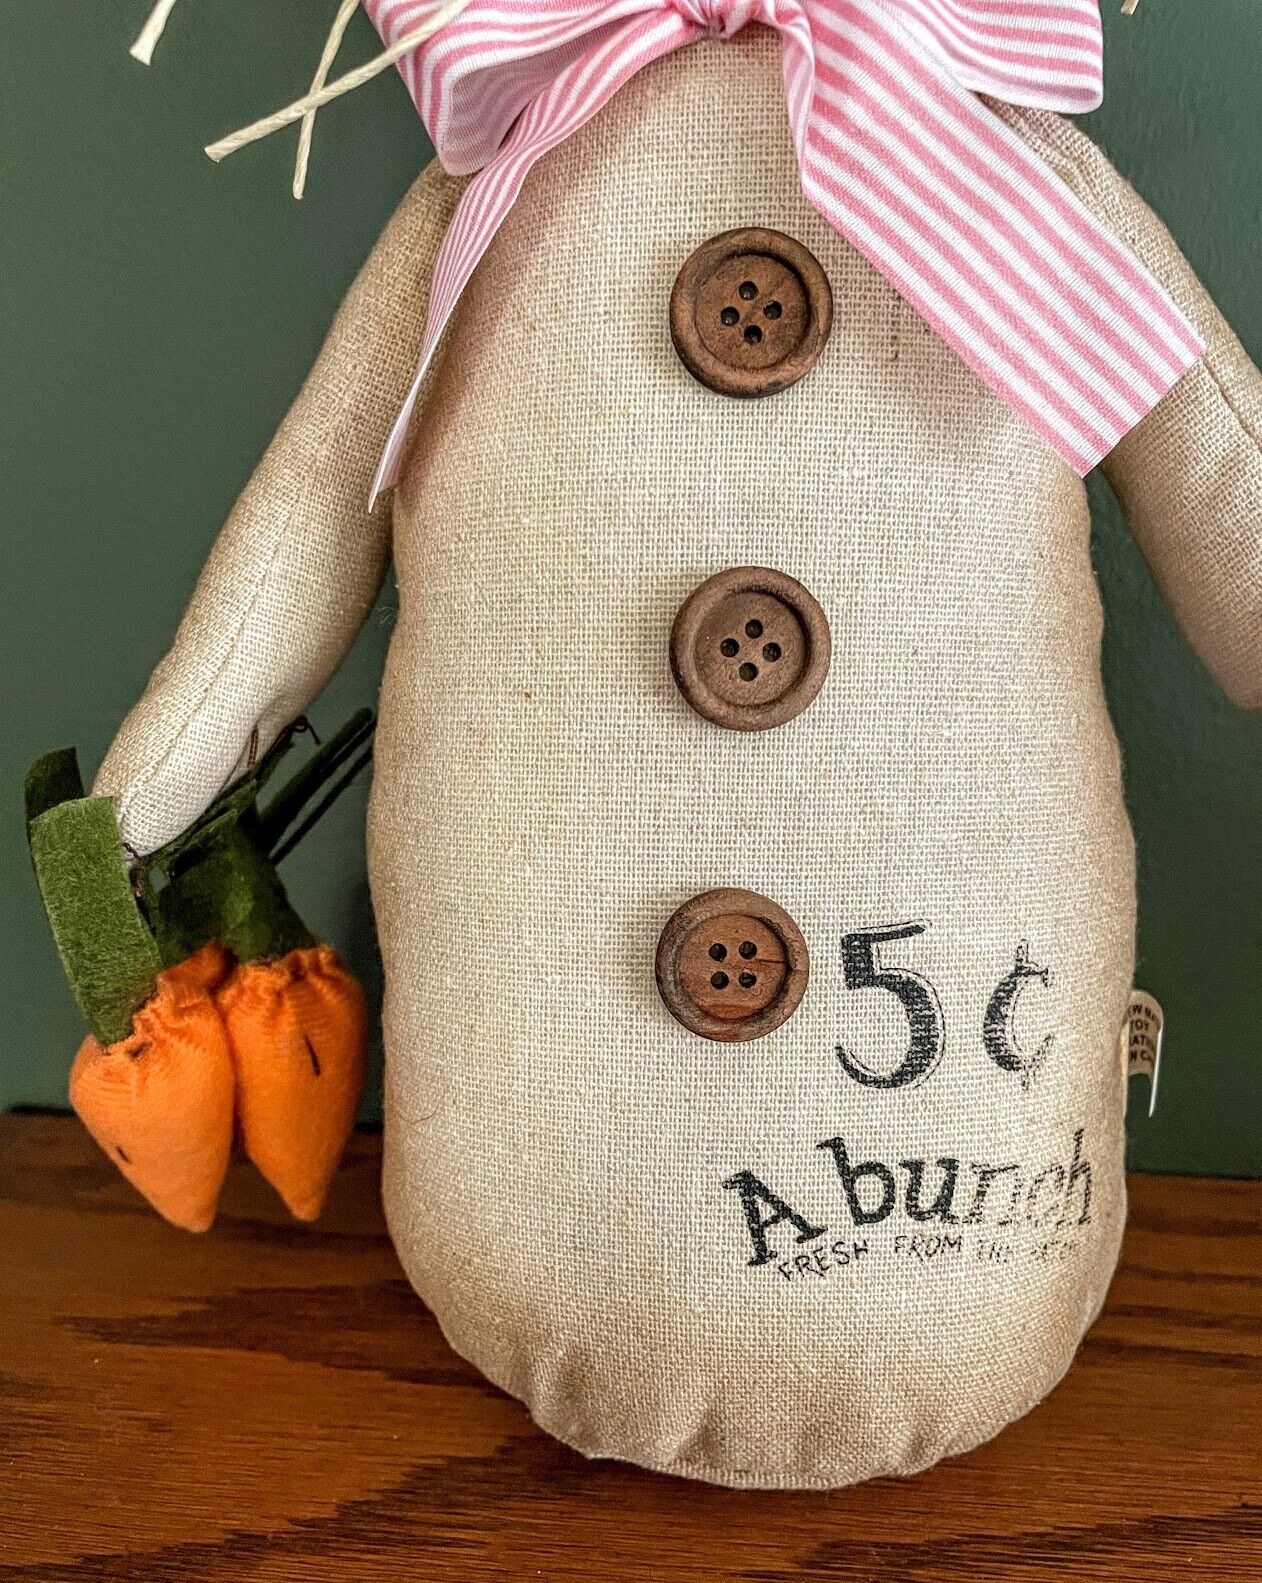 Primitive Country 18” Cheeky Bunny w/Carrots Doll - The Primitive Pineapple Collection